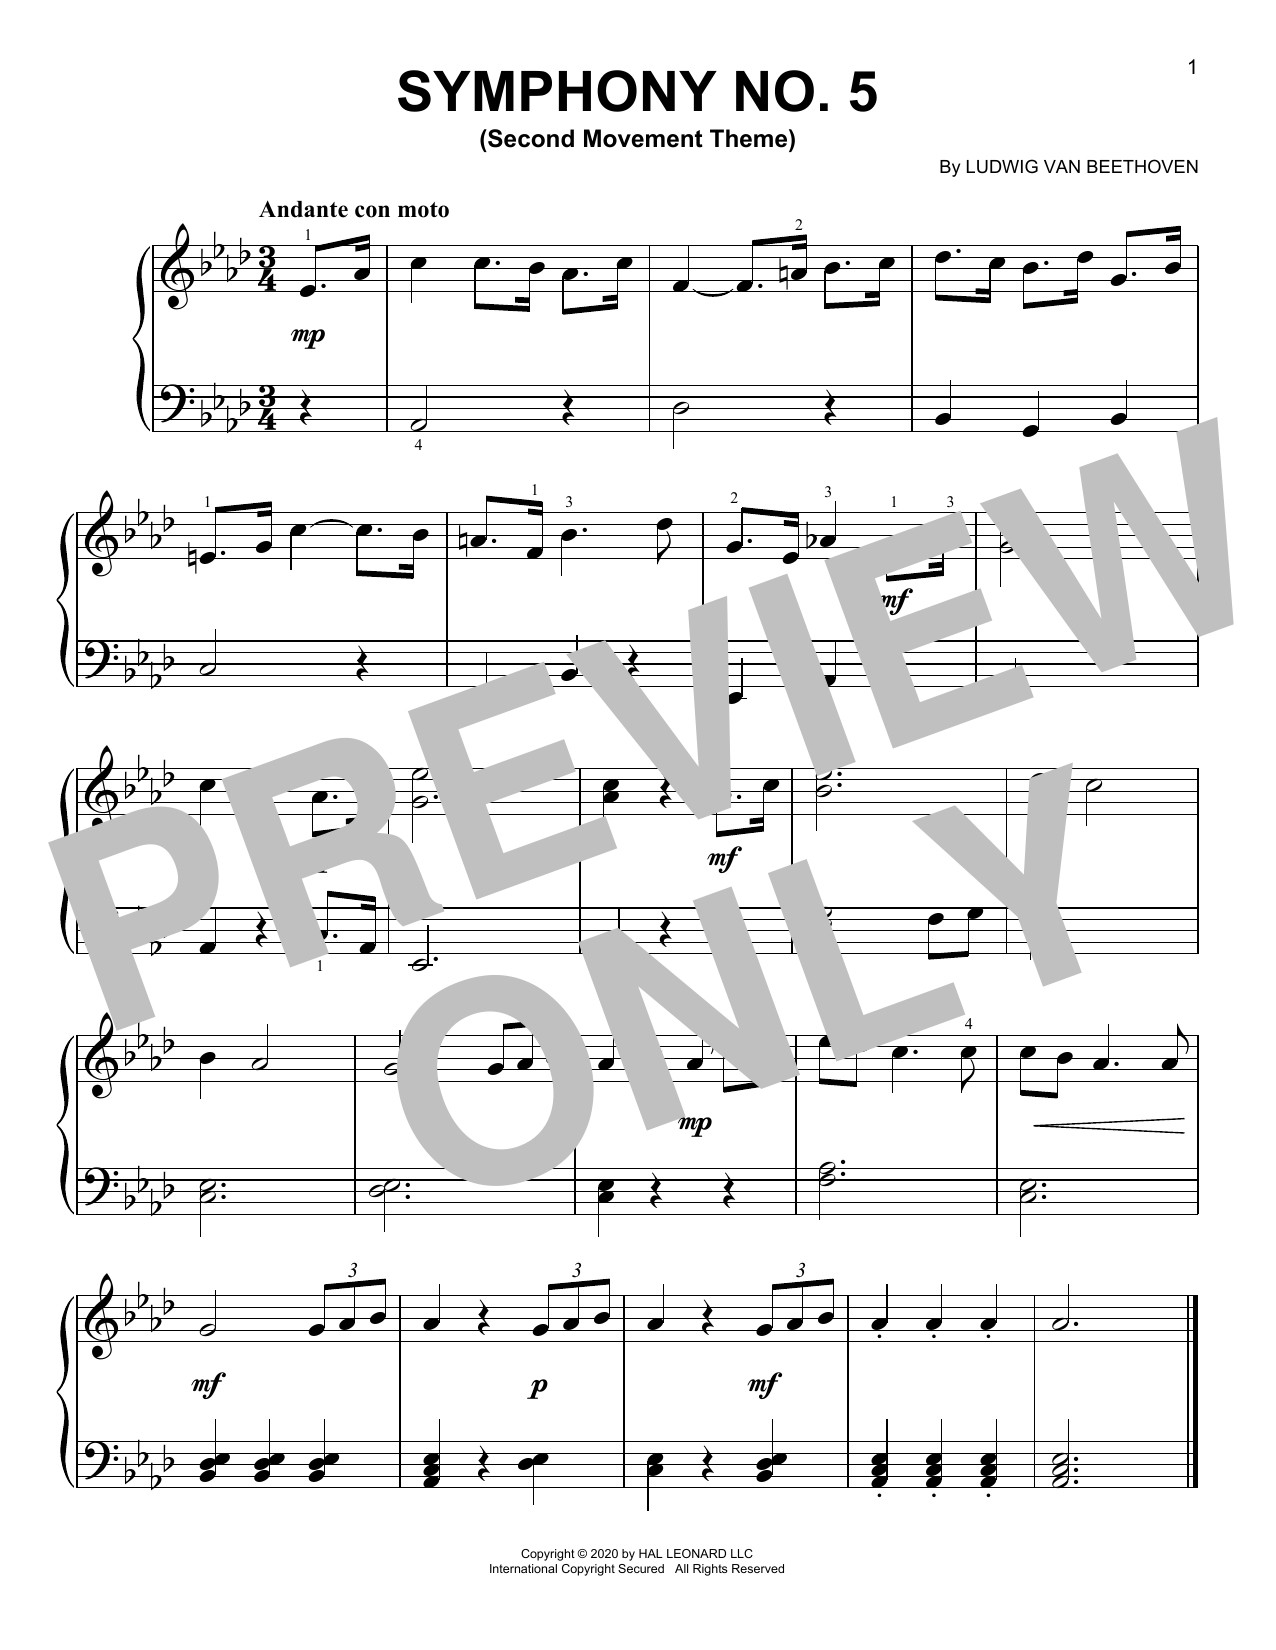 Ludwig van Beethoven Symphony No. 5, Second Movement Excerpt sheet music notes printable PDF score